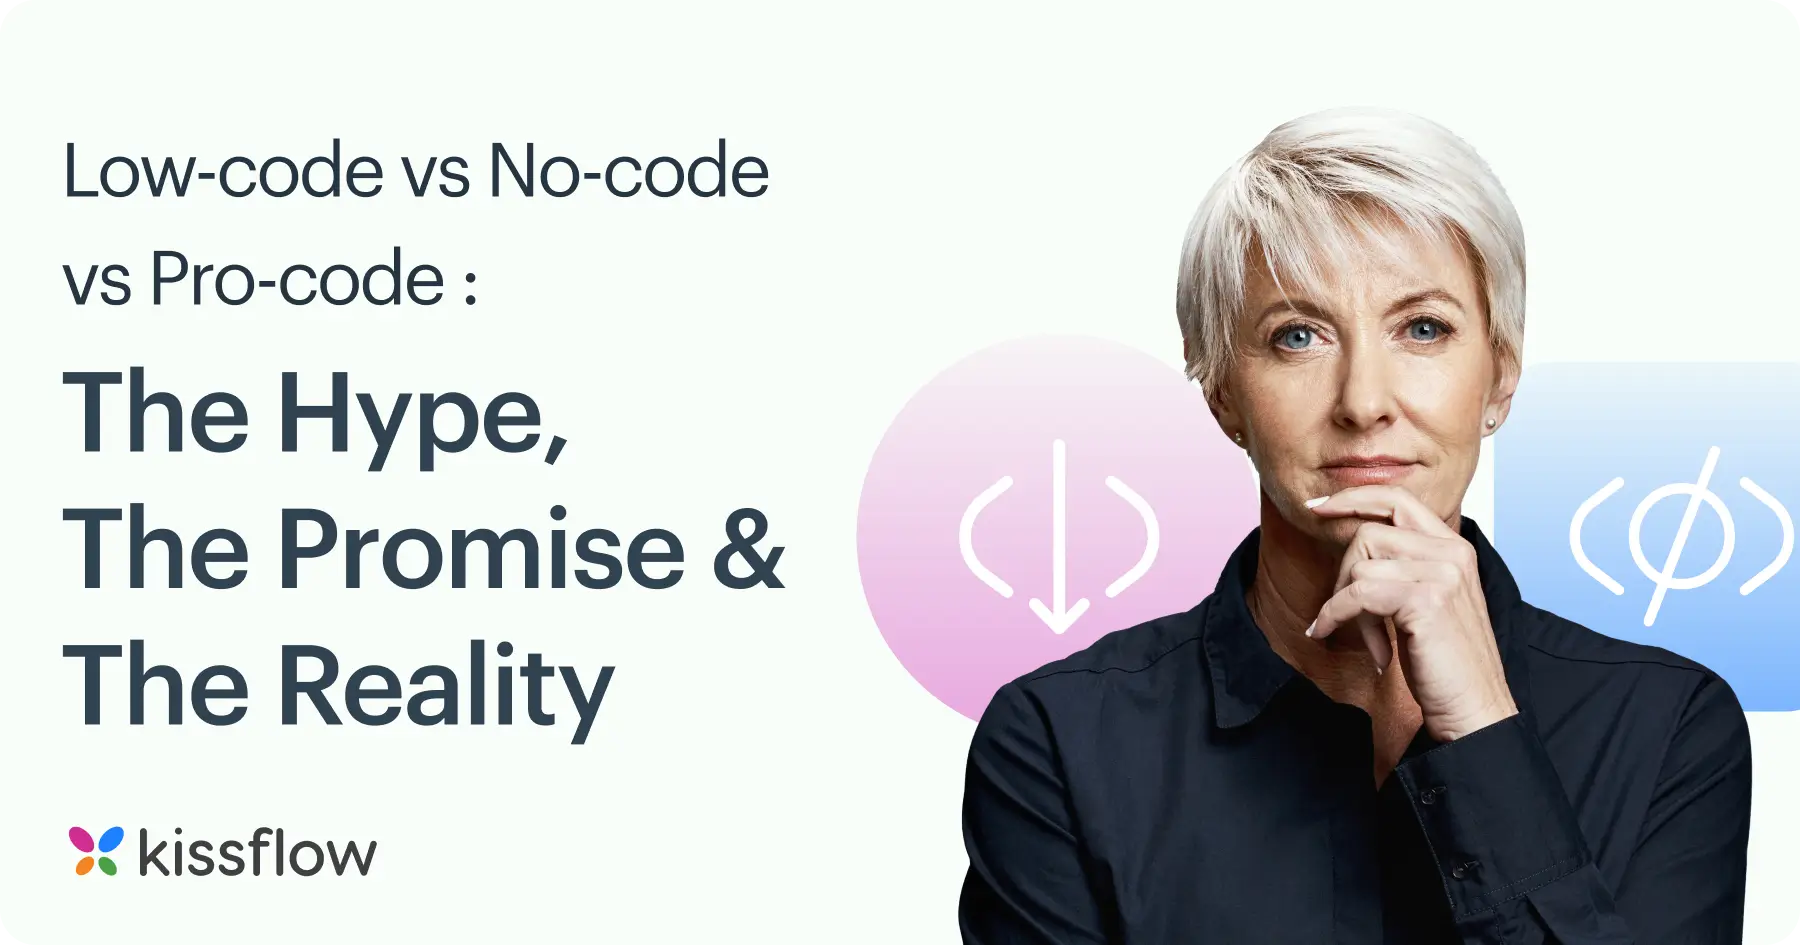 Low-code vs No-code vs Pro-code : The Hype, The Promise & The Reality